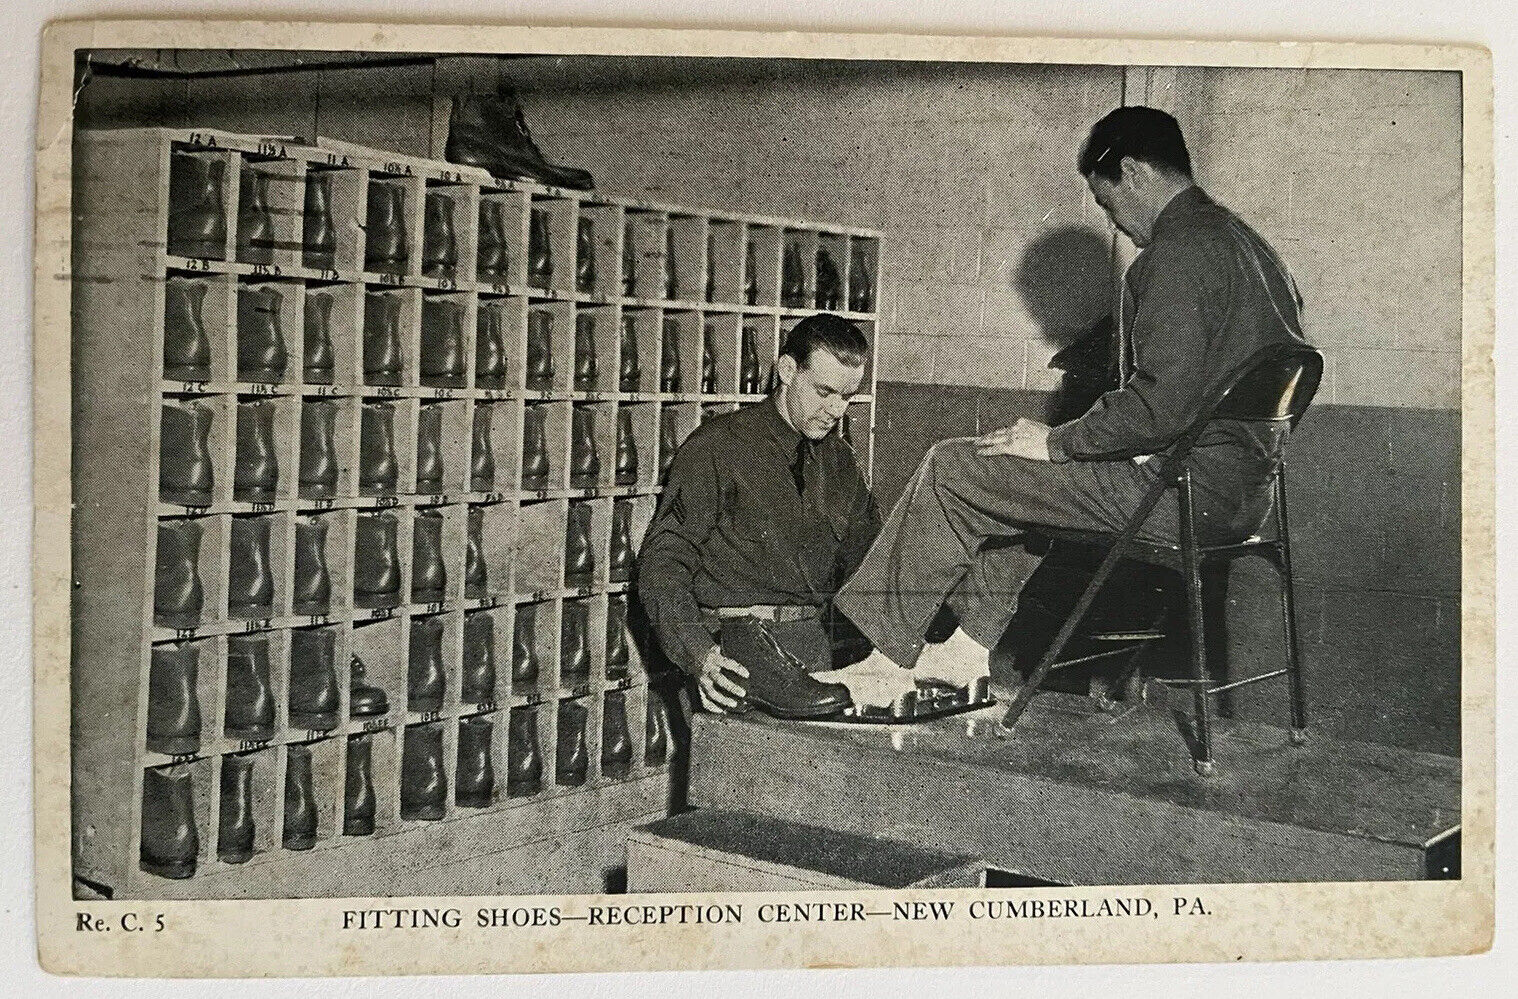 New Cumberland PA Army Depot Shoe Fitting Scene Vintage Military Postcard c1940